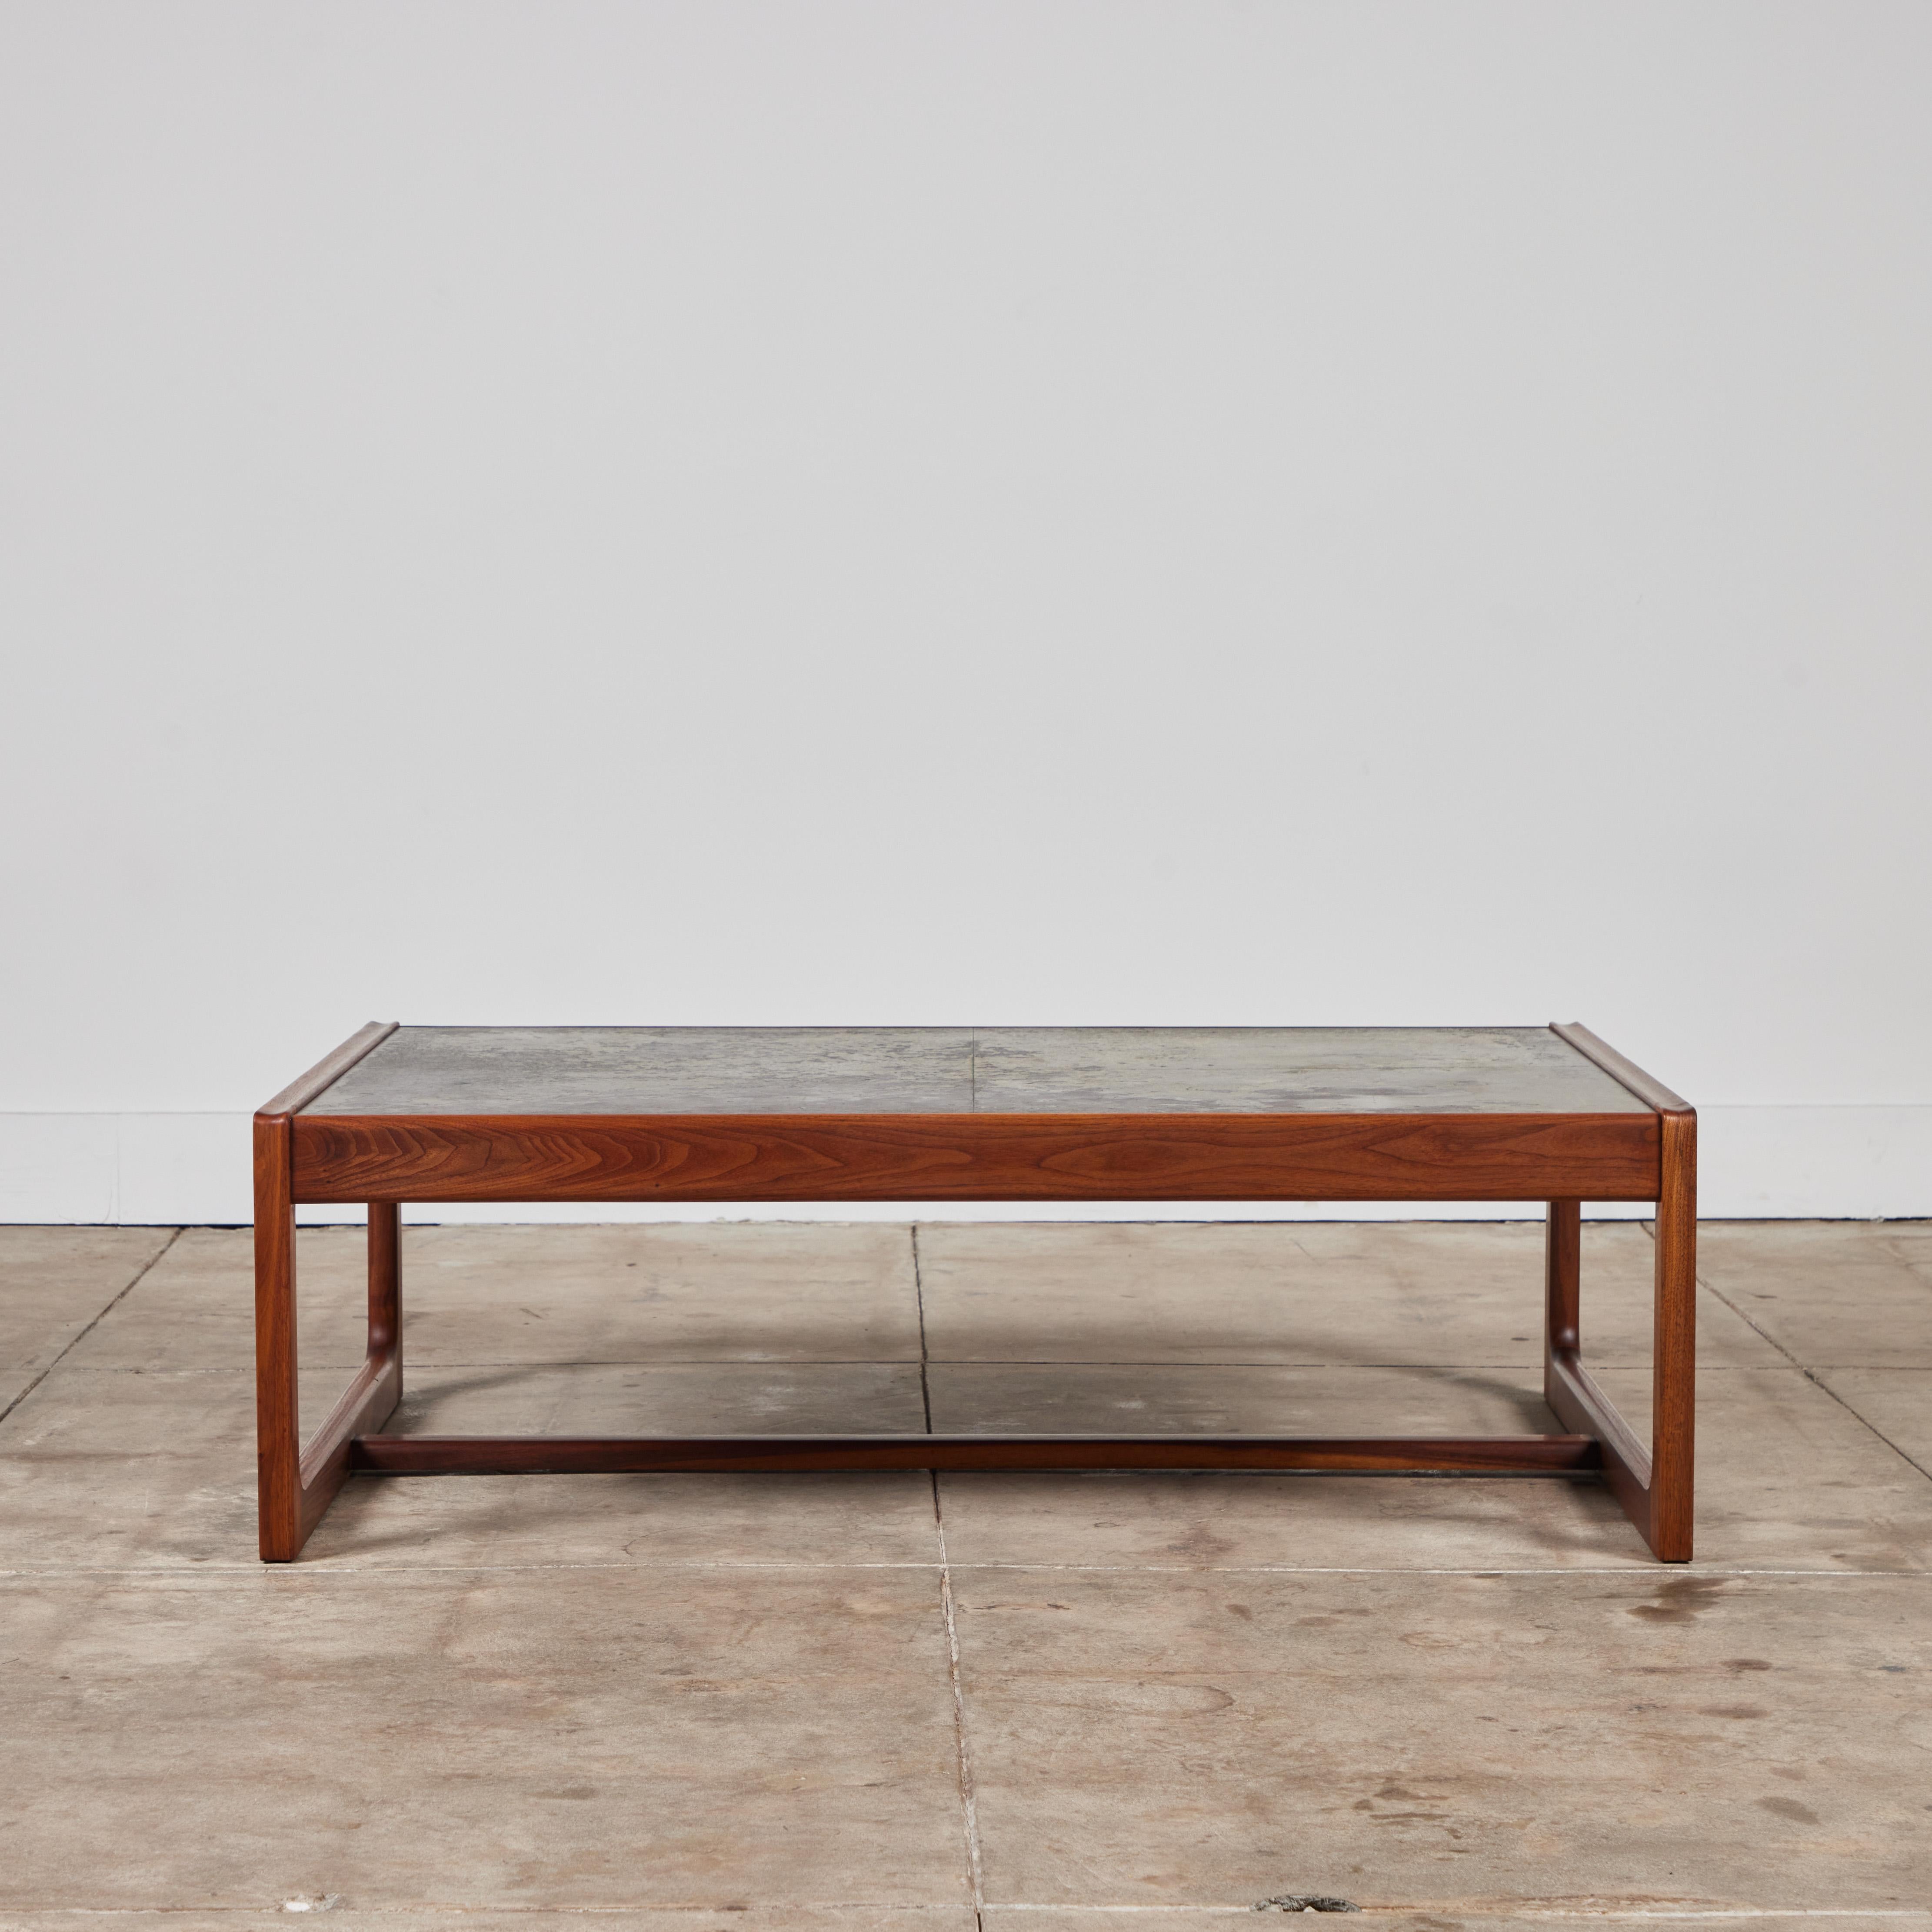 Mid-20th Century DUX Teak Coffee Table with Patinated Bronze Table Top